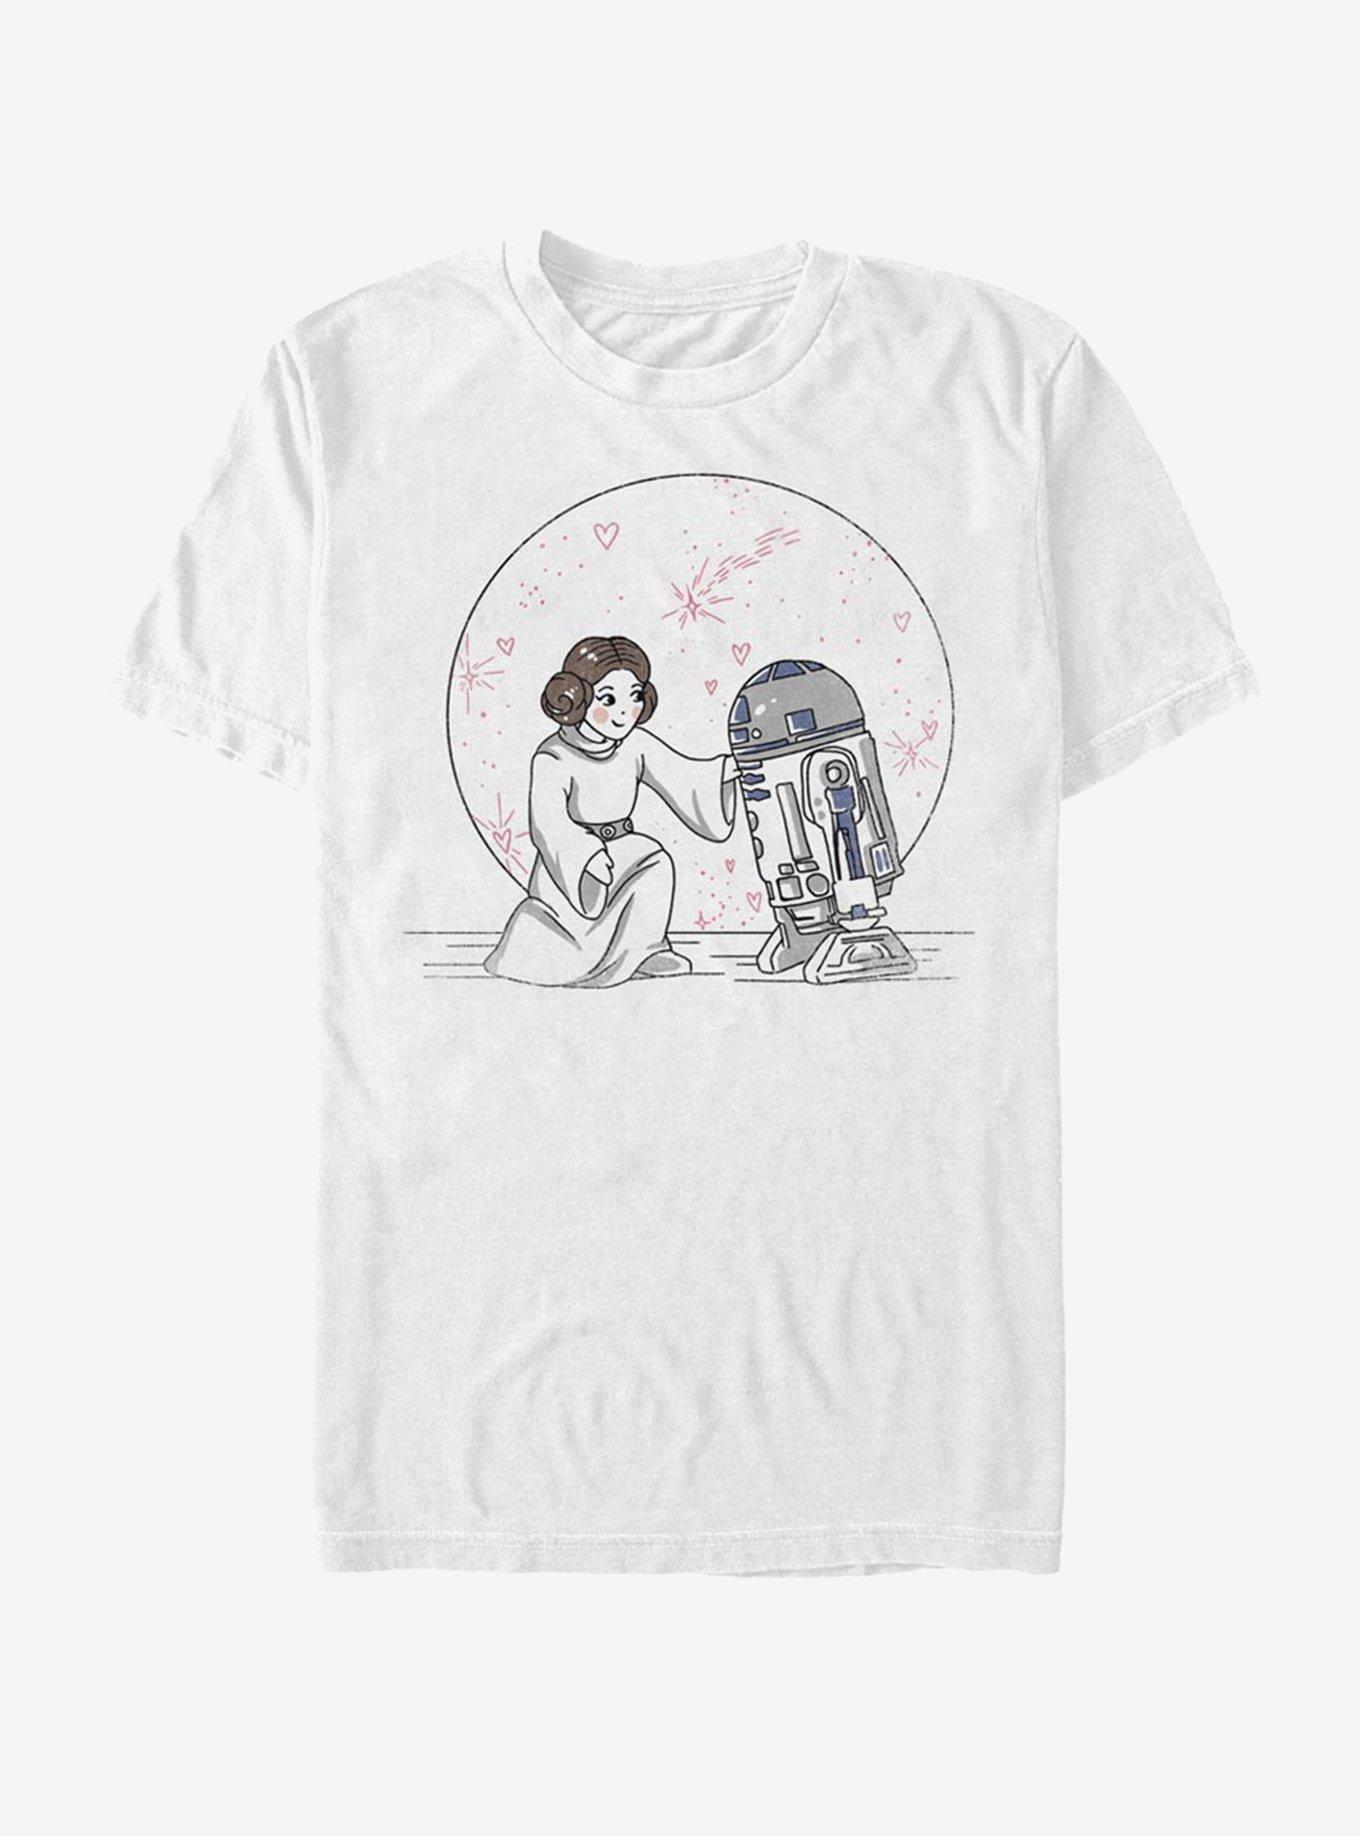 Star Wars Friends In Space T-Shirt, WHITE, hi-res